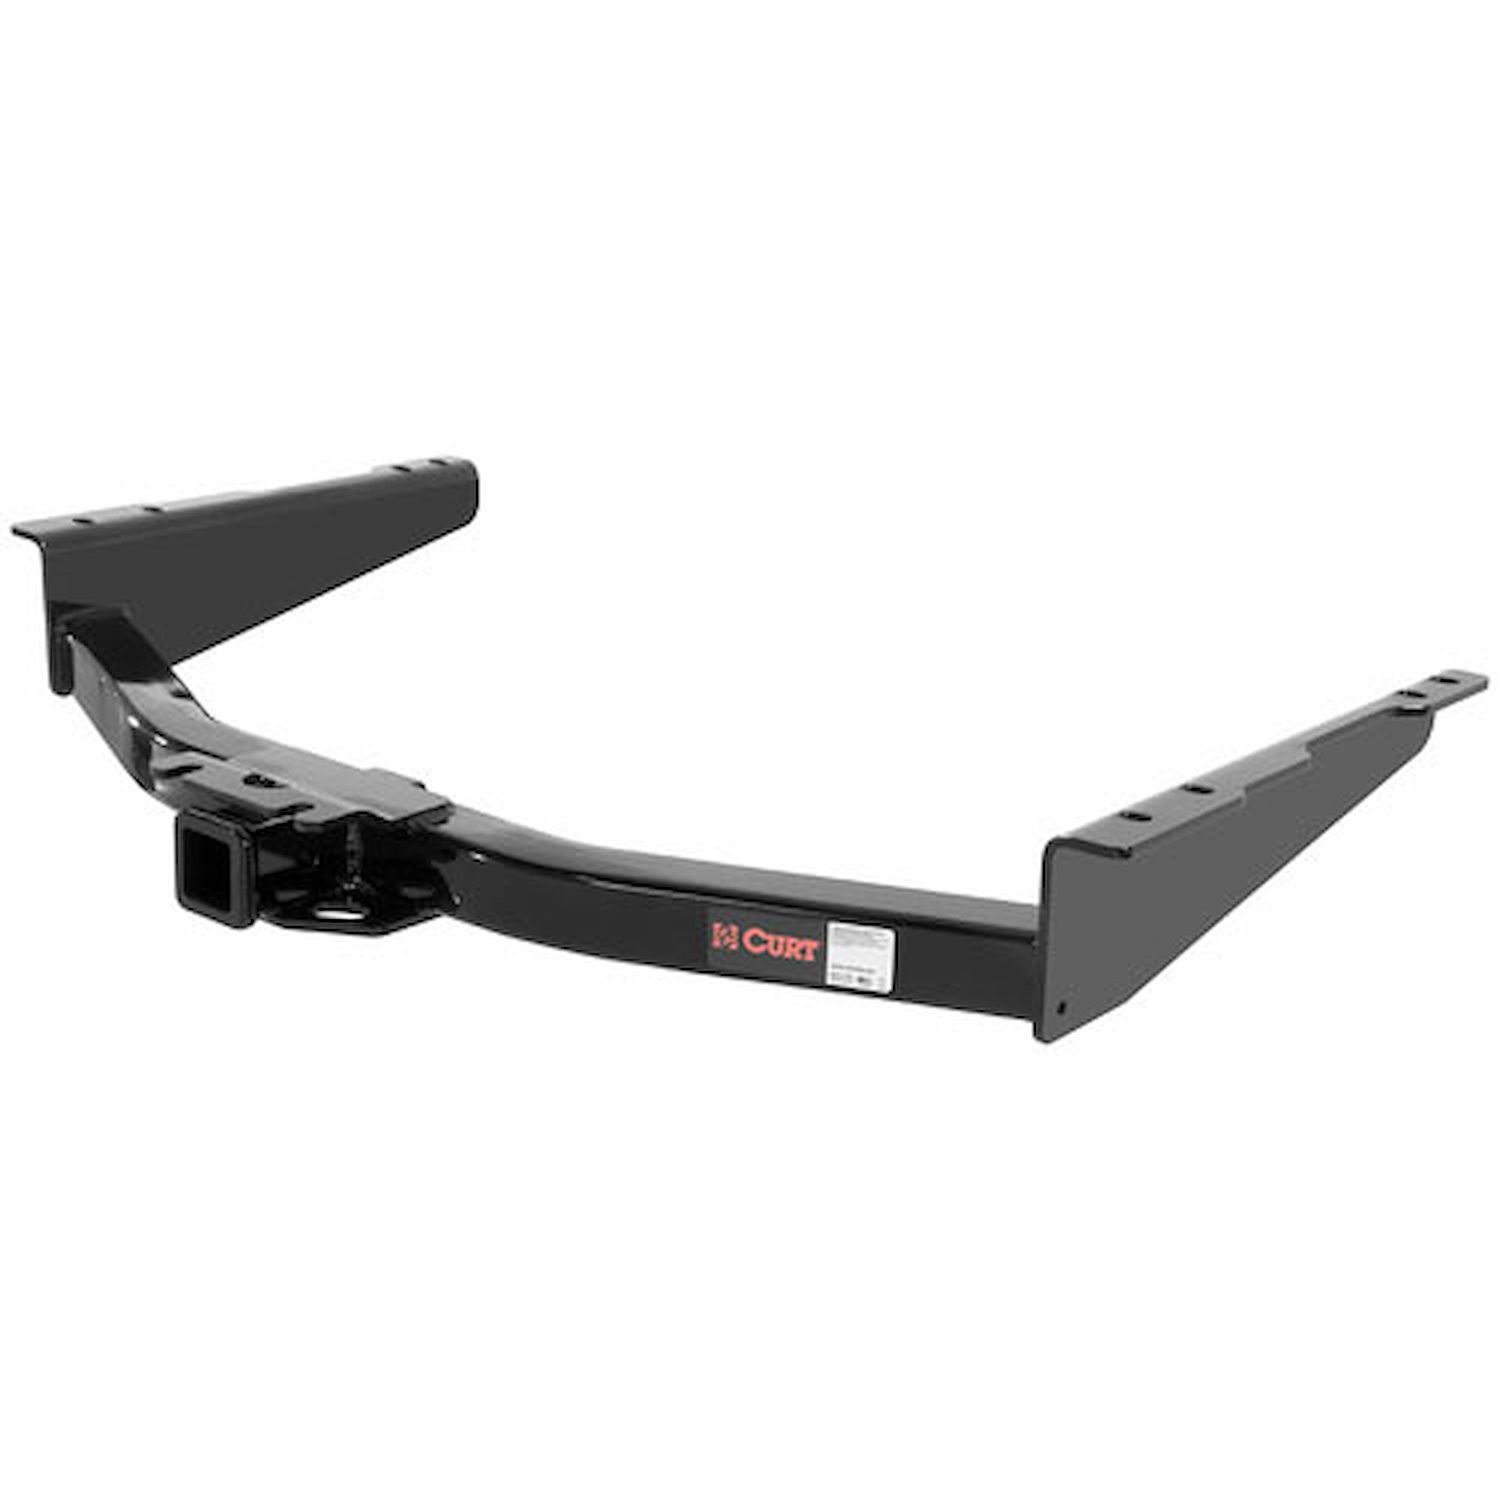 Class 4 Receiver Hitch 2012-16 NV Commercial Van